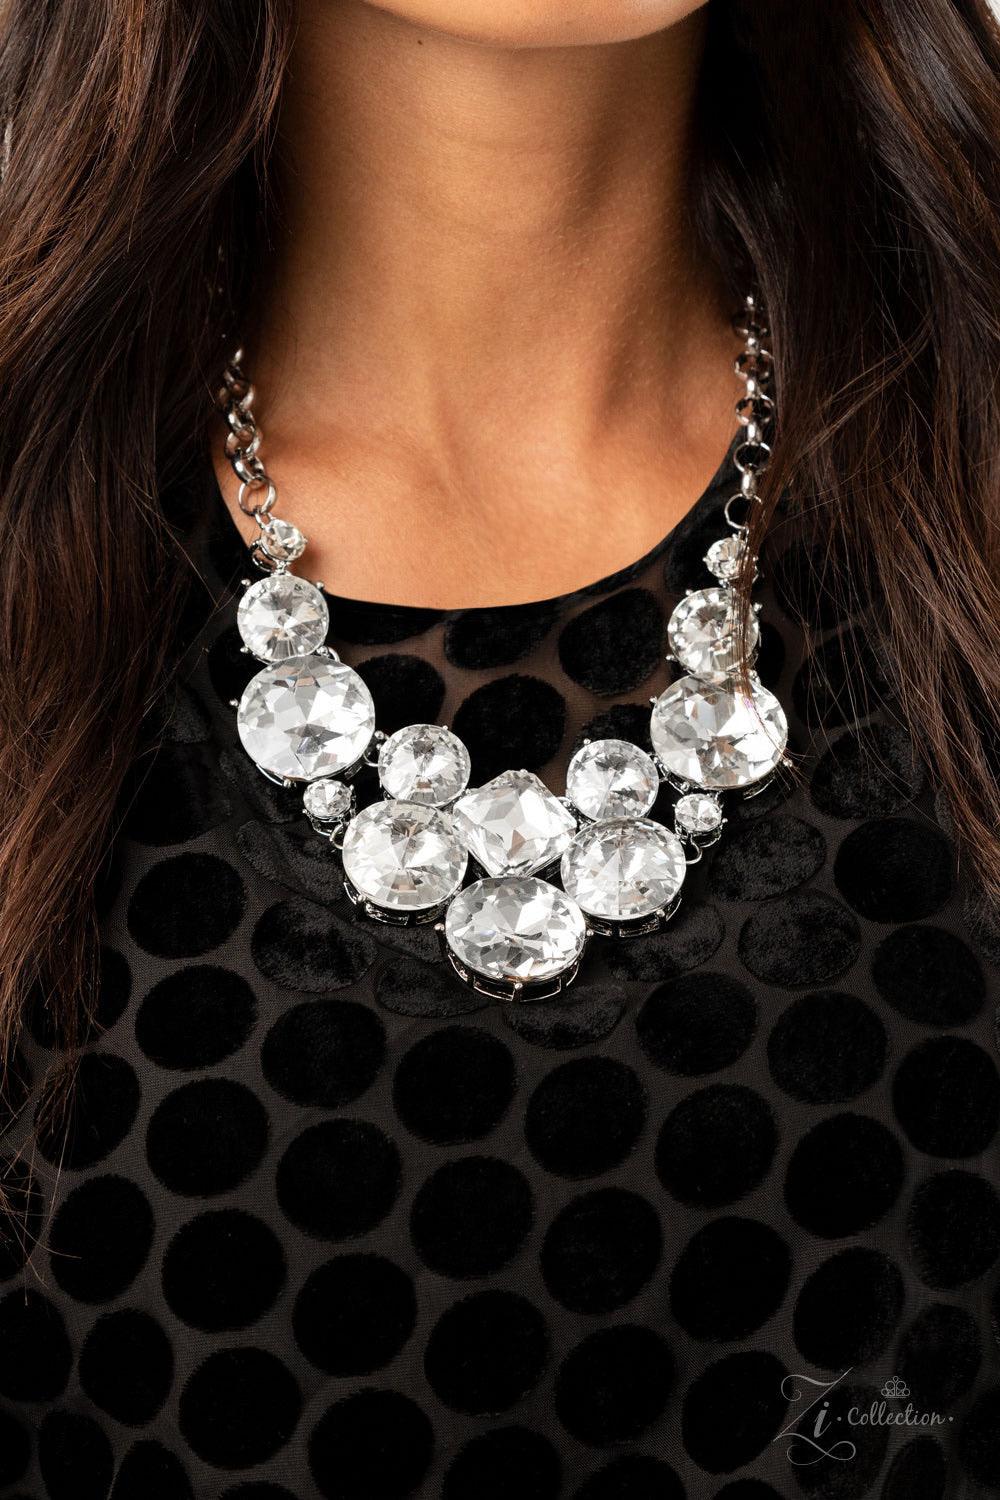 Paparazzi Accessories Unpredictable 💗💗ZiCollection $25💗💗 Varying in size and shape, a dramatic collision of oversized white rhinestones connect into an unapologetically glamorous statement piece below the collar. Attached to chunky silver links, the b